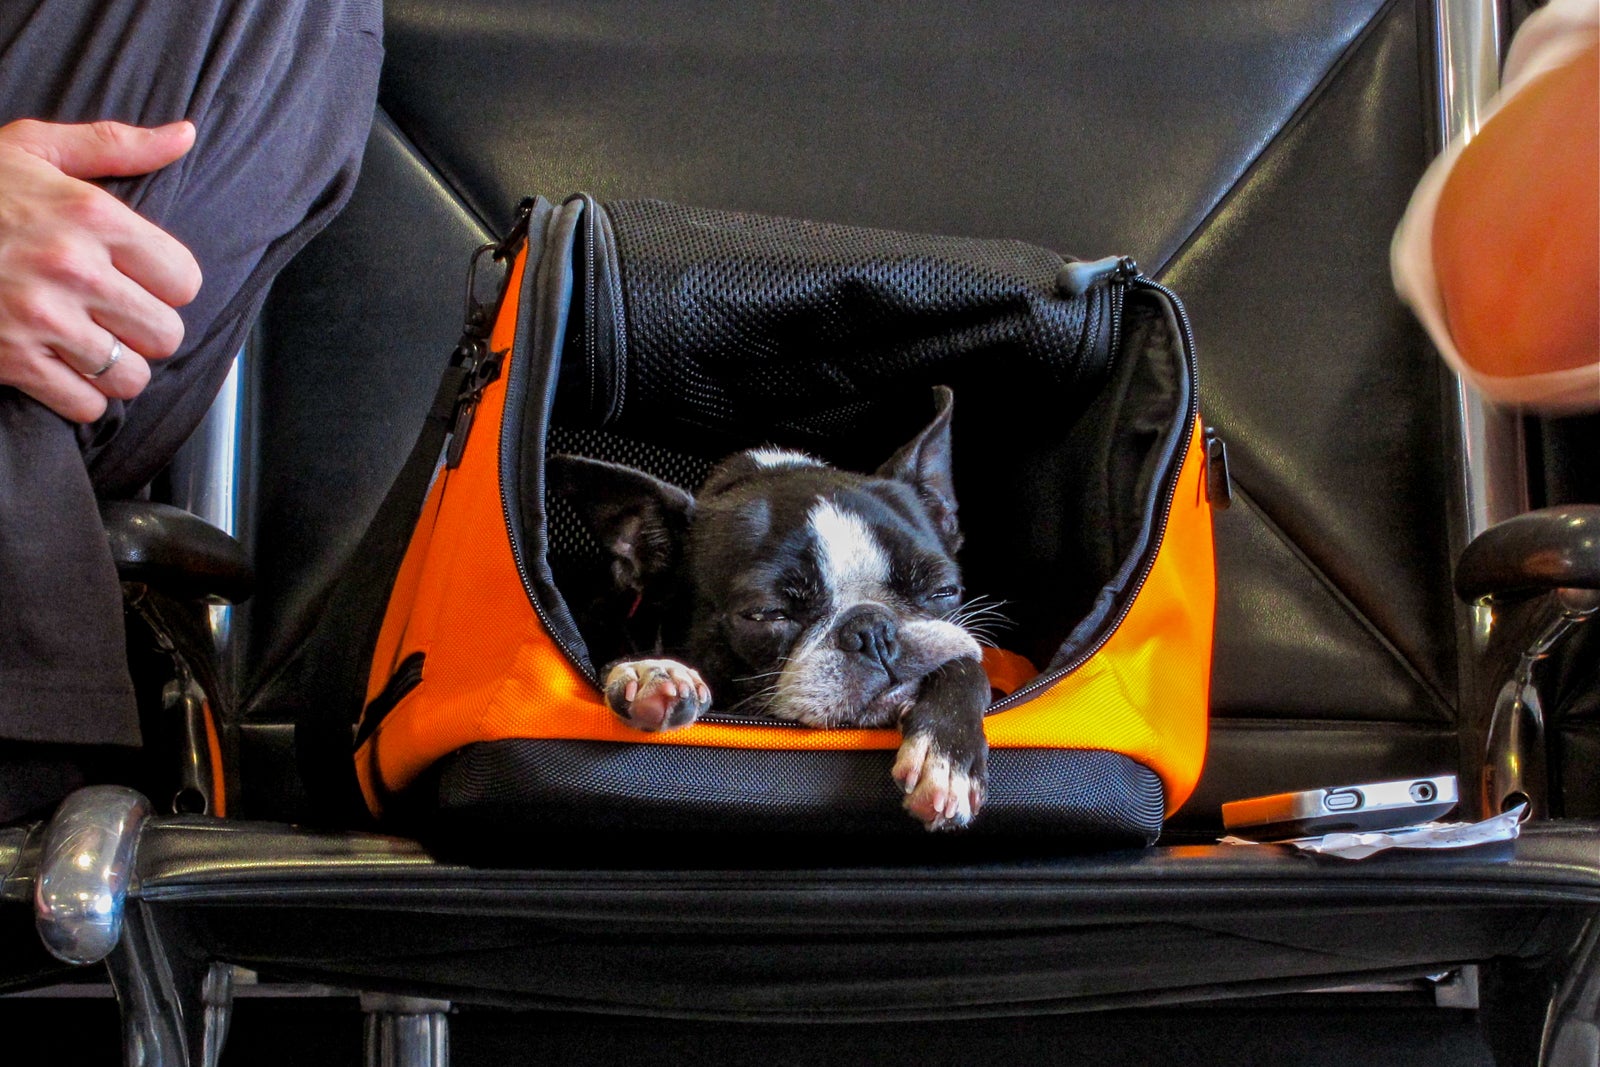 https://thepointsguy.global.ssl.fastly.net/us/originals/2022/06/Pet-Travel_small-dog-in-carrier-at-airport_Robert-Mooney.jpg